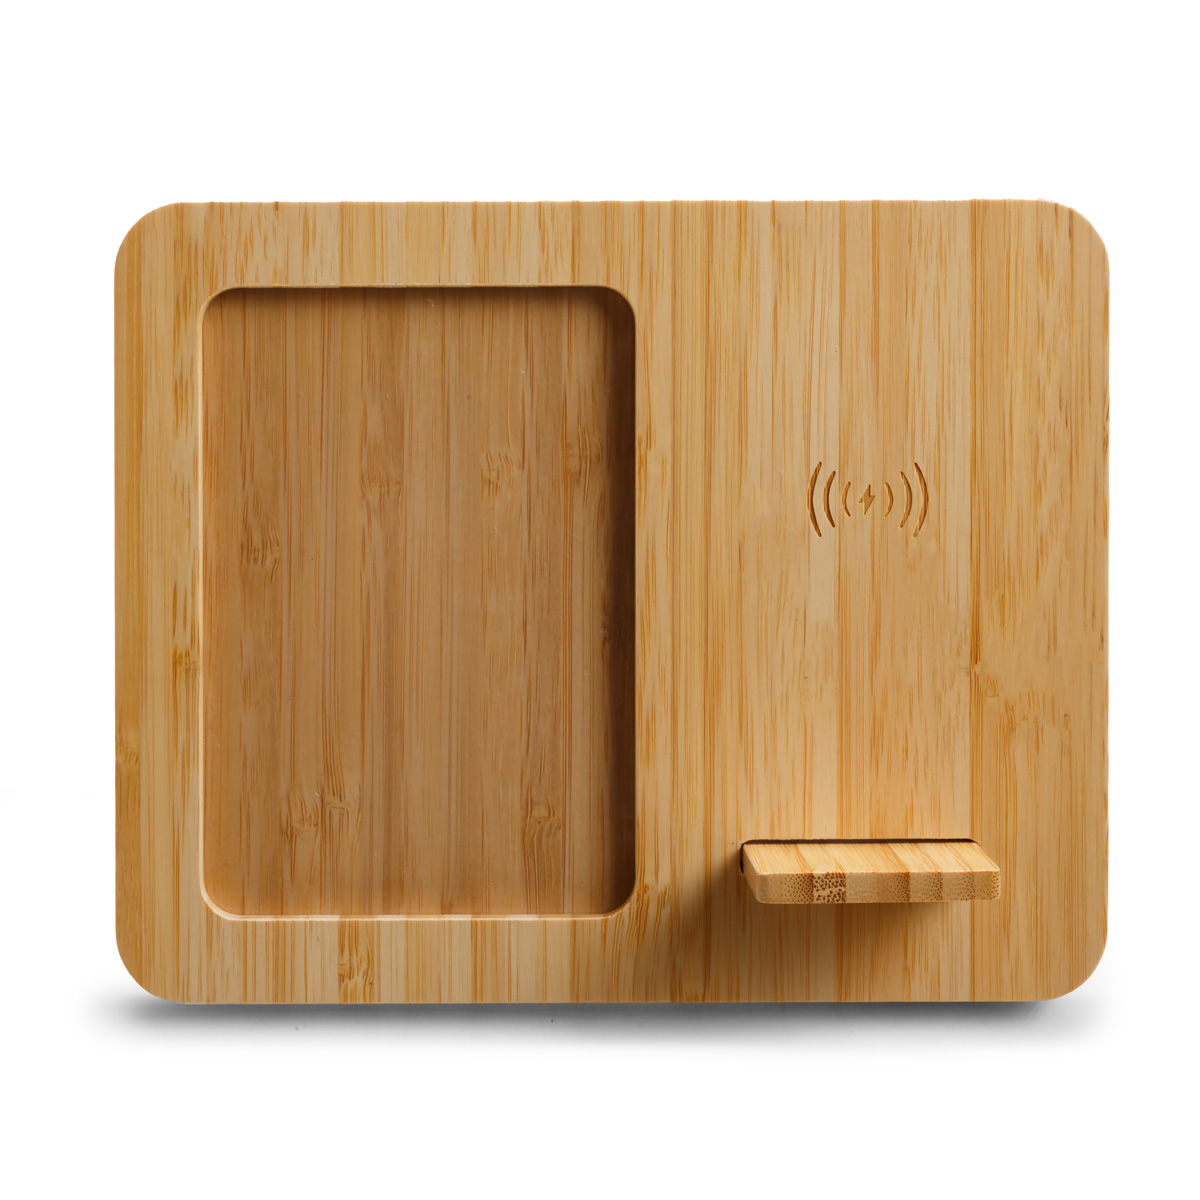 Bamboo Wireless Charger & Photo Frame Product Image